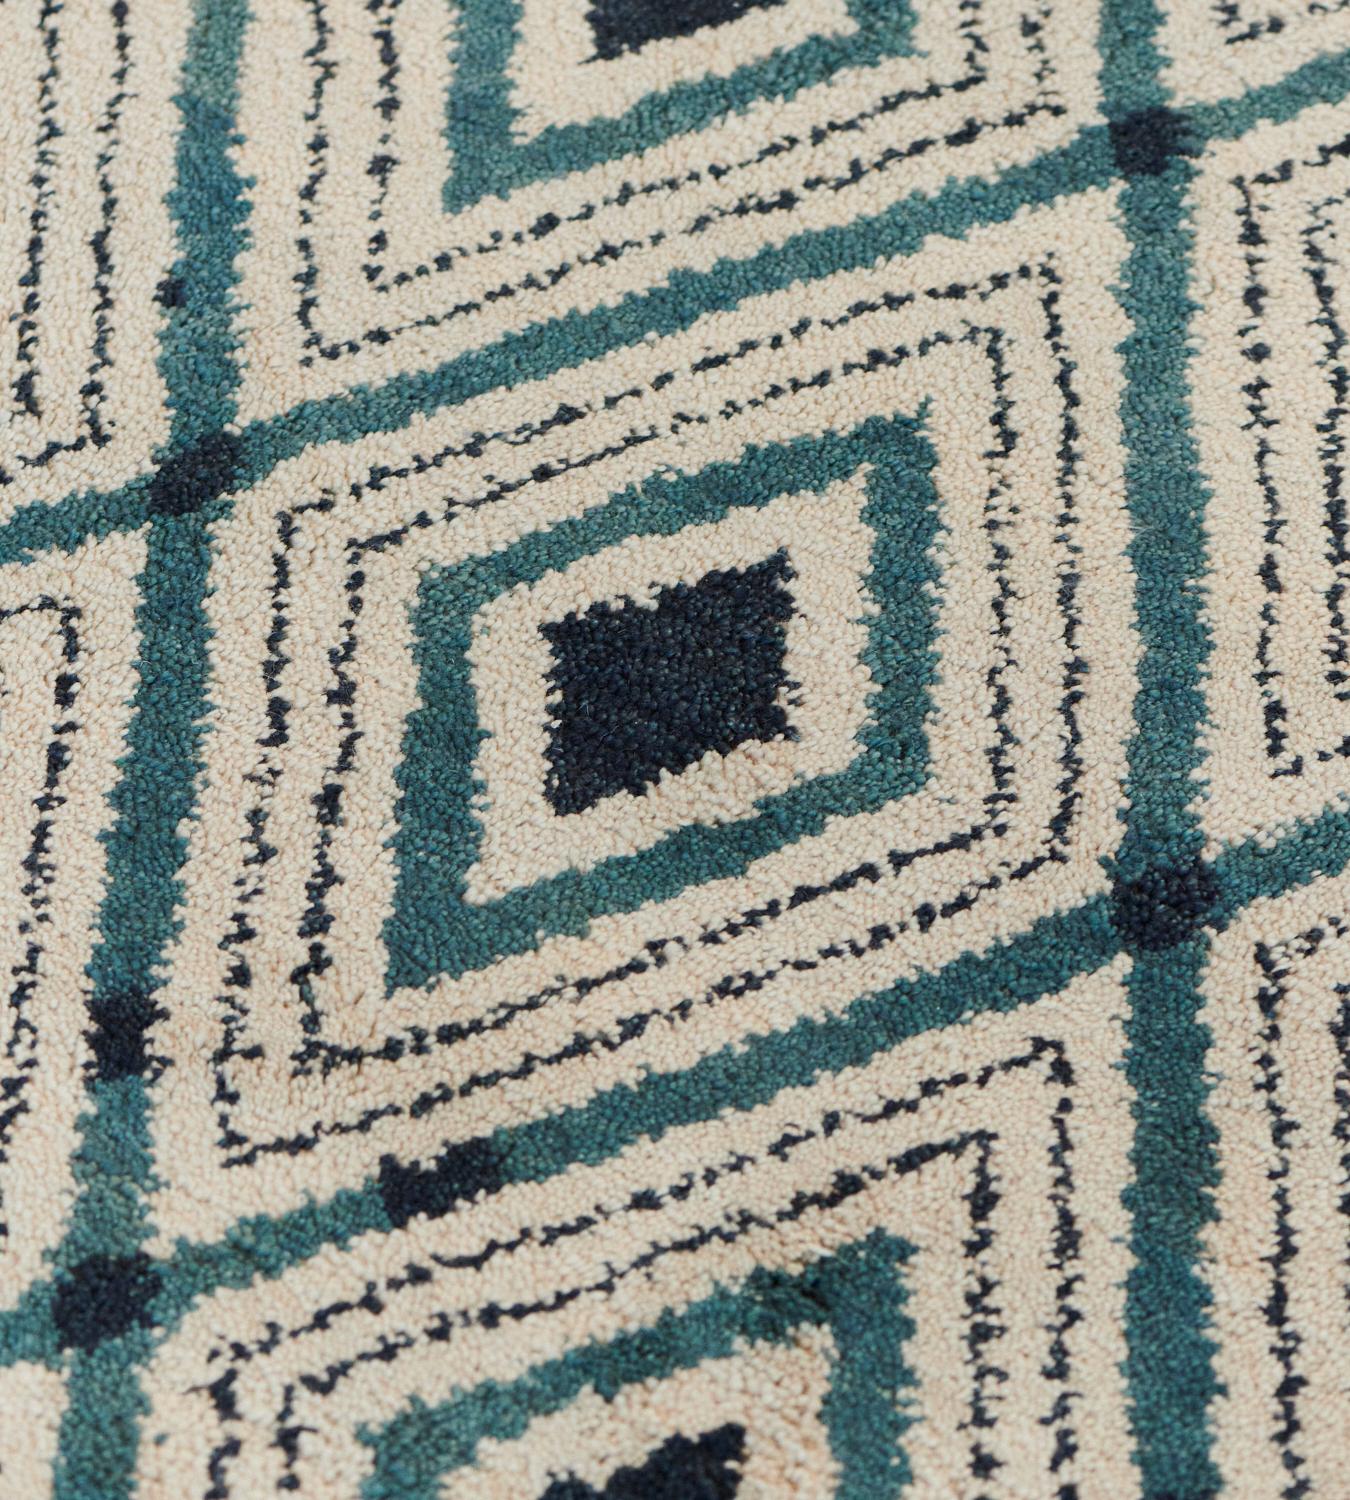 Part of the Mansour Modern collection, this wool rug is handwoven by master weavers using the highest quality techniques and materials.